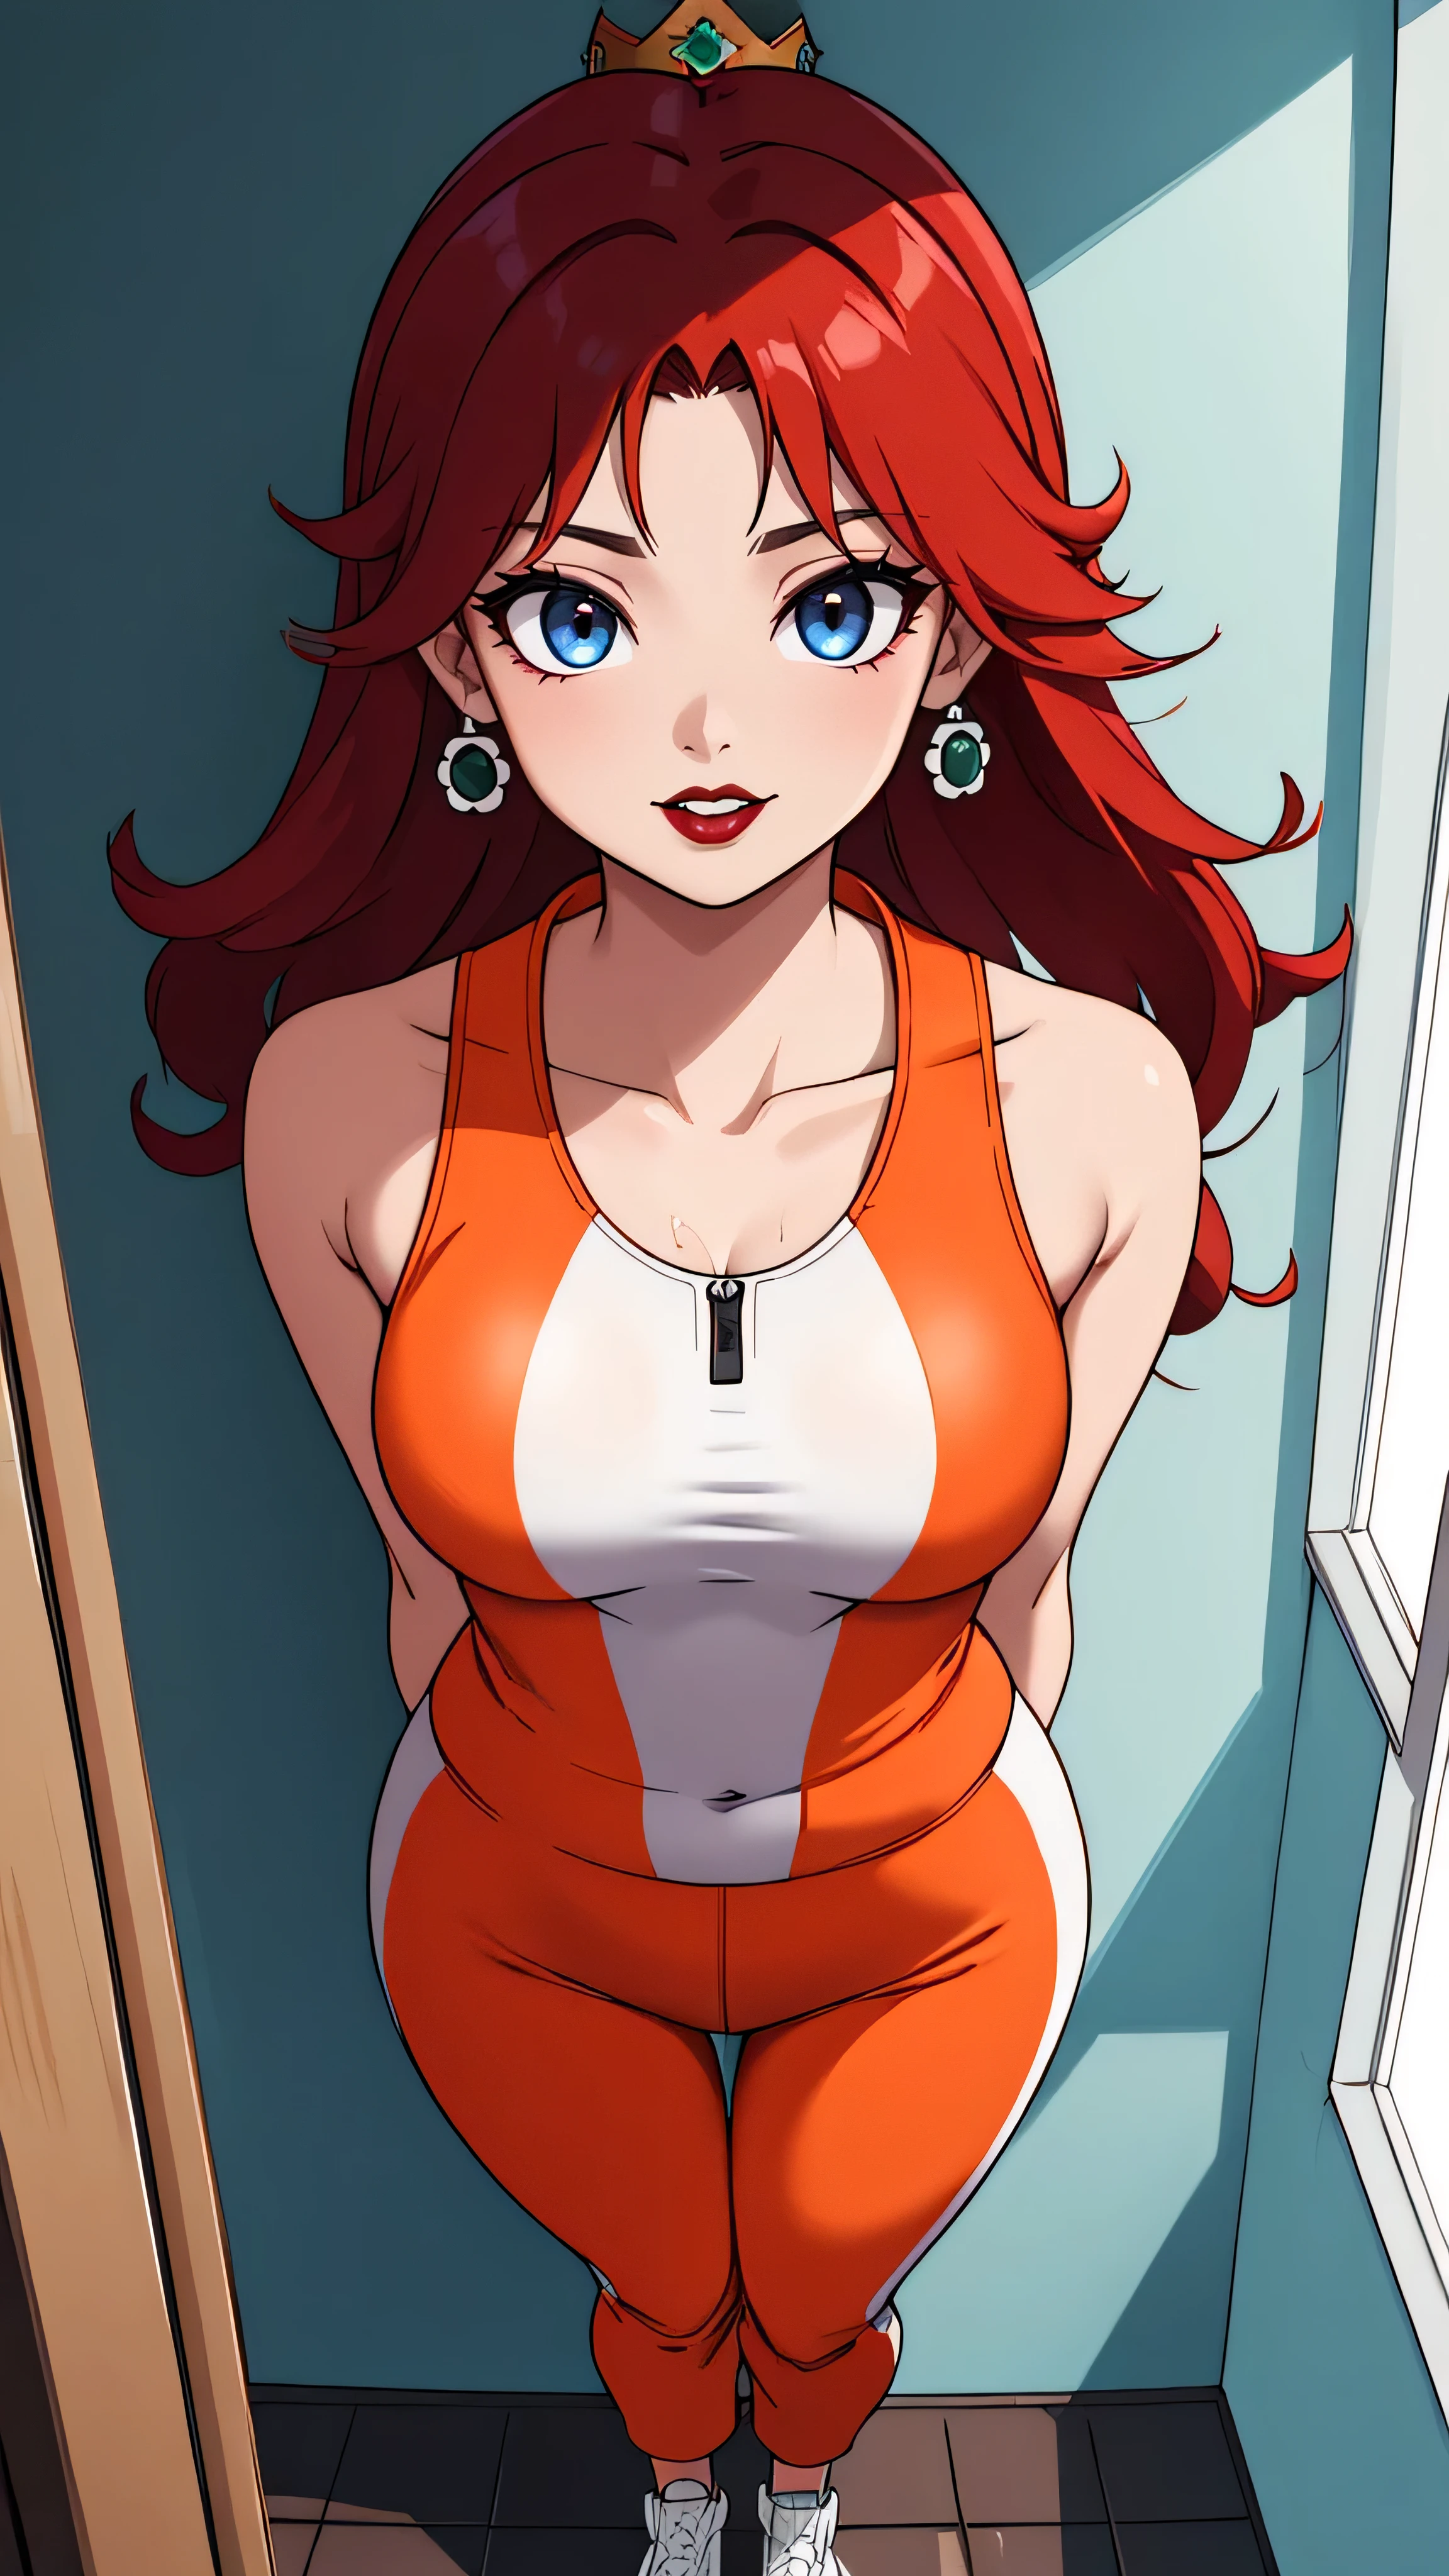 ((high detailed, best quality, 4k, masterpiece, hd:1.3)), ((best quality)), (((HD))), (((8k))), (ultraDH), (ultra HD), Shower_room_background, shower room, Soothing Shower, sunlight through the window, window, wooden room, Princess Daisy, BREAK neon blue eyes, seductive, attractive, sexy smile, smiling, smooth anime cg art, 36C_breasts, cleavage, 36C cleavage, long legs, vivid colors, detailed digital art, slim body, perfect skin, dark red hair, long red hair, dark hair, red hair, long_dark_red_hair_over_breasts, dark_red_hair_over_breast, wet hair, wet red hair, wet_dark_red_hair, wet_dark_red_hair_over_breast, BREAK crown, looking at viewer, BREAK looking at viewer, extremely detailed face, (orange and white jumpsuit), (Jumpsuit:1.5), (orange and white racing suit), (racing suit:1.5), (orange high heels), no bra, no underwear, full body, earrings, gem, dark gothic eyeshadows, dark eyeshadows, black eyeshadows, black_sexy_lips, black lips, dark lips, gothic painted lips, dark_black_lips, very dark lips, black_painted_lips, (very thin lips), thin lips, detailed lips, (dark:1.2), (perfect hands, perfect anatomy), black makeup, detailed fingers, five fingers per hand, 5 fingers, (1 girl), (solo:1.3), (breast focus), (breasts out:1.3), (from above:1.3), (arms behind back:1.3),